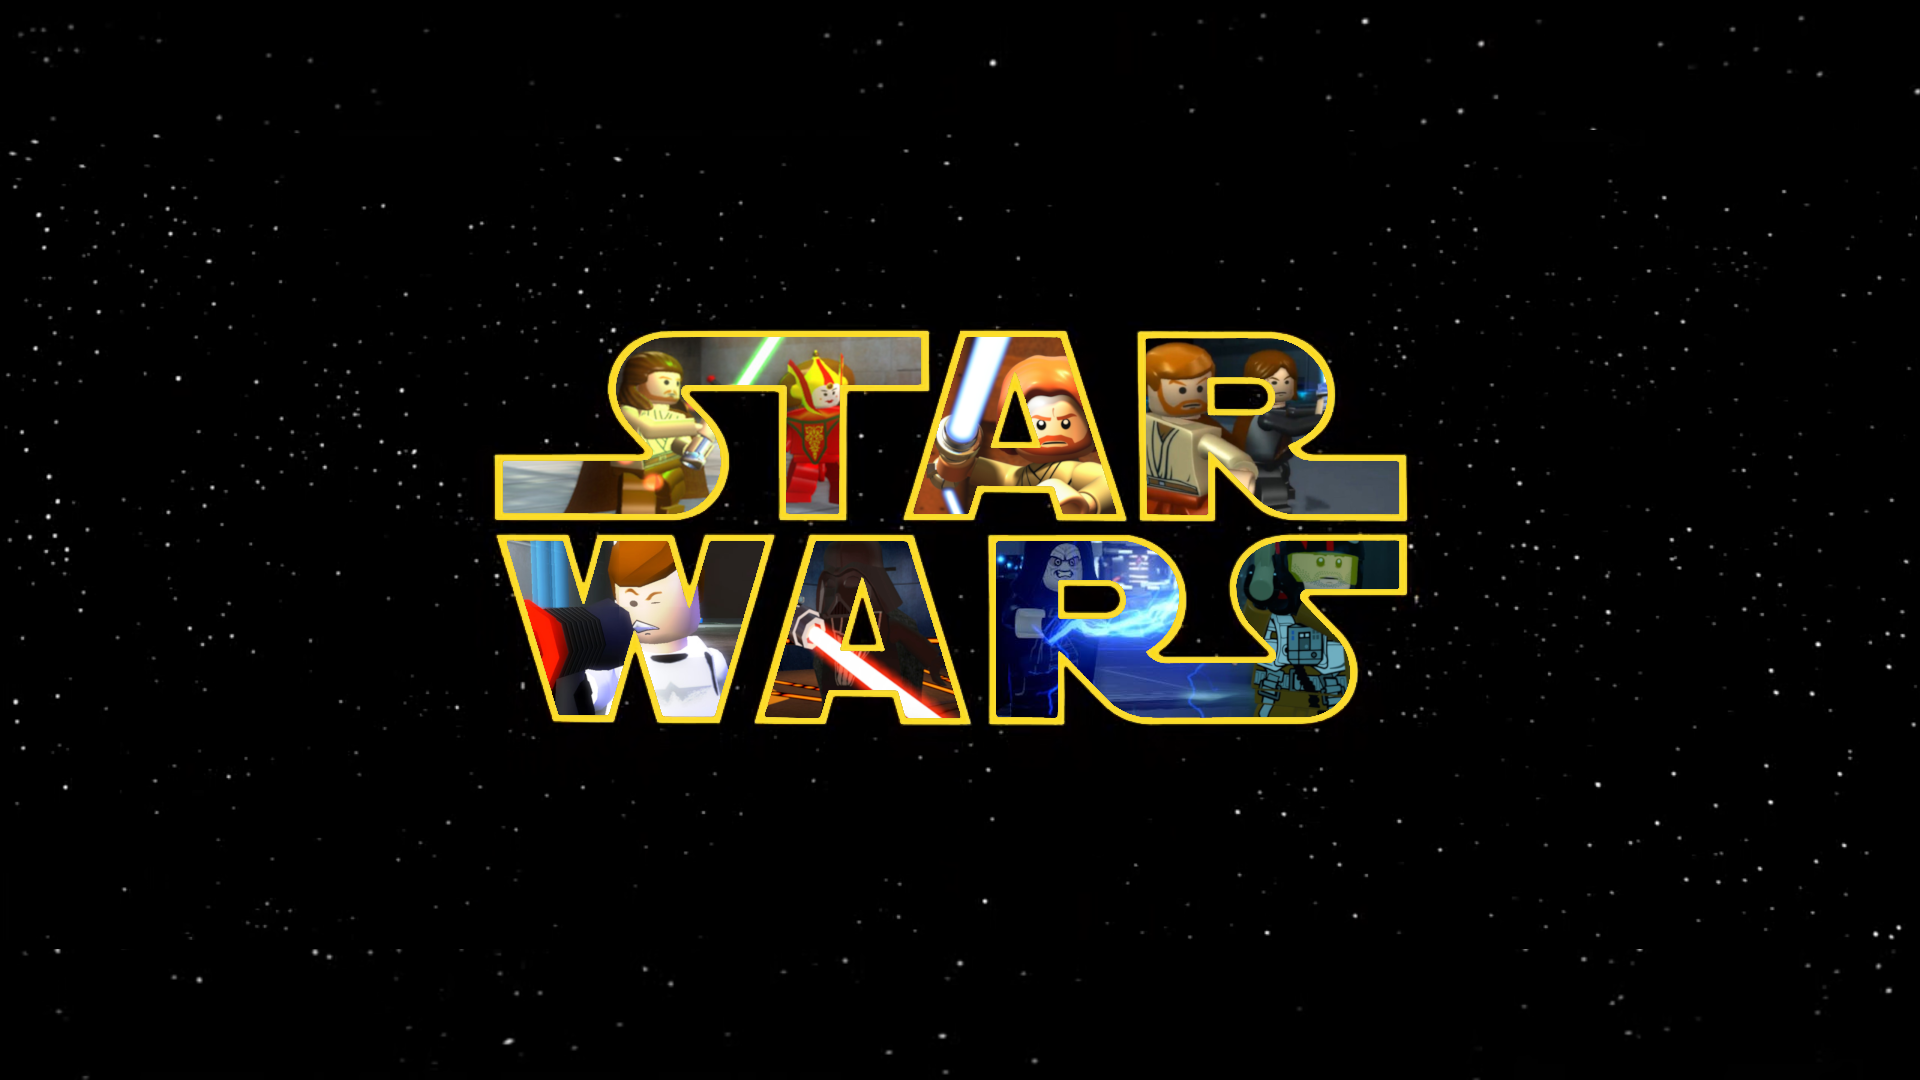 A LEGO Star Wars wallpaper that I made